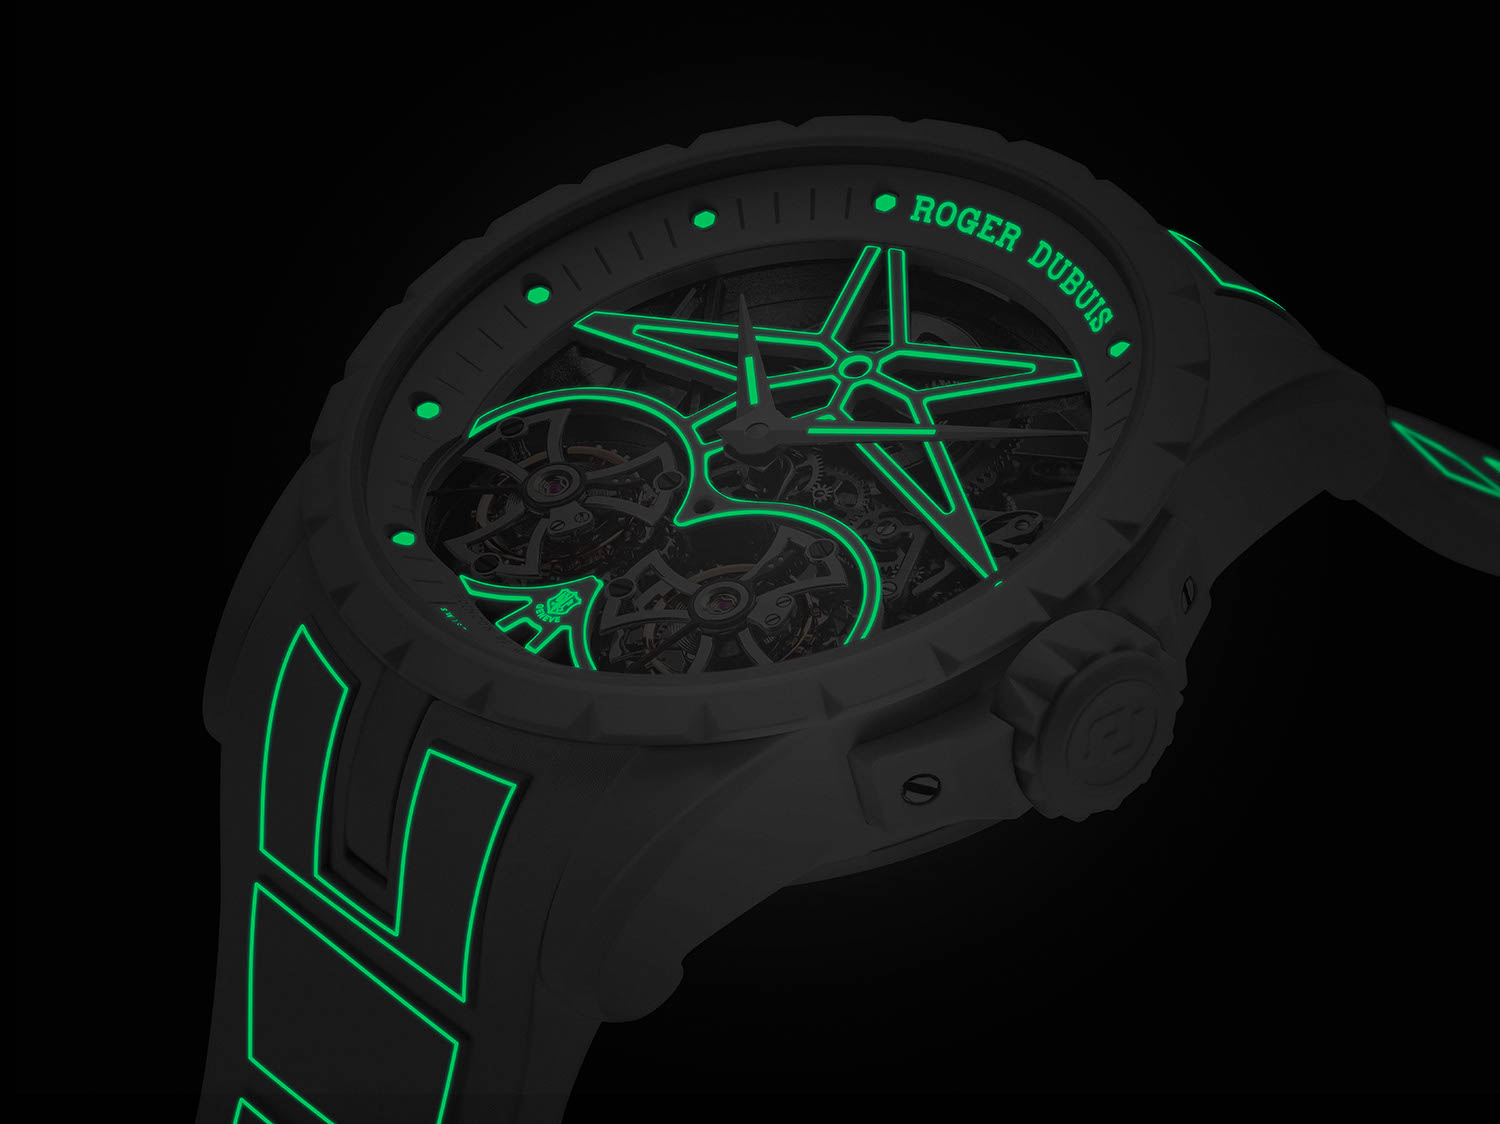 Roger Dubuis Excalibur Twofold showing off it's Super-LumiNova treated bridges and strap in the dark